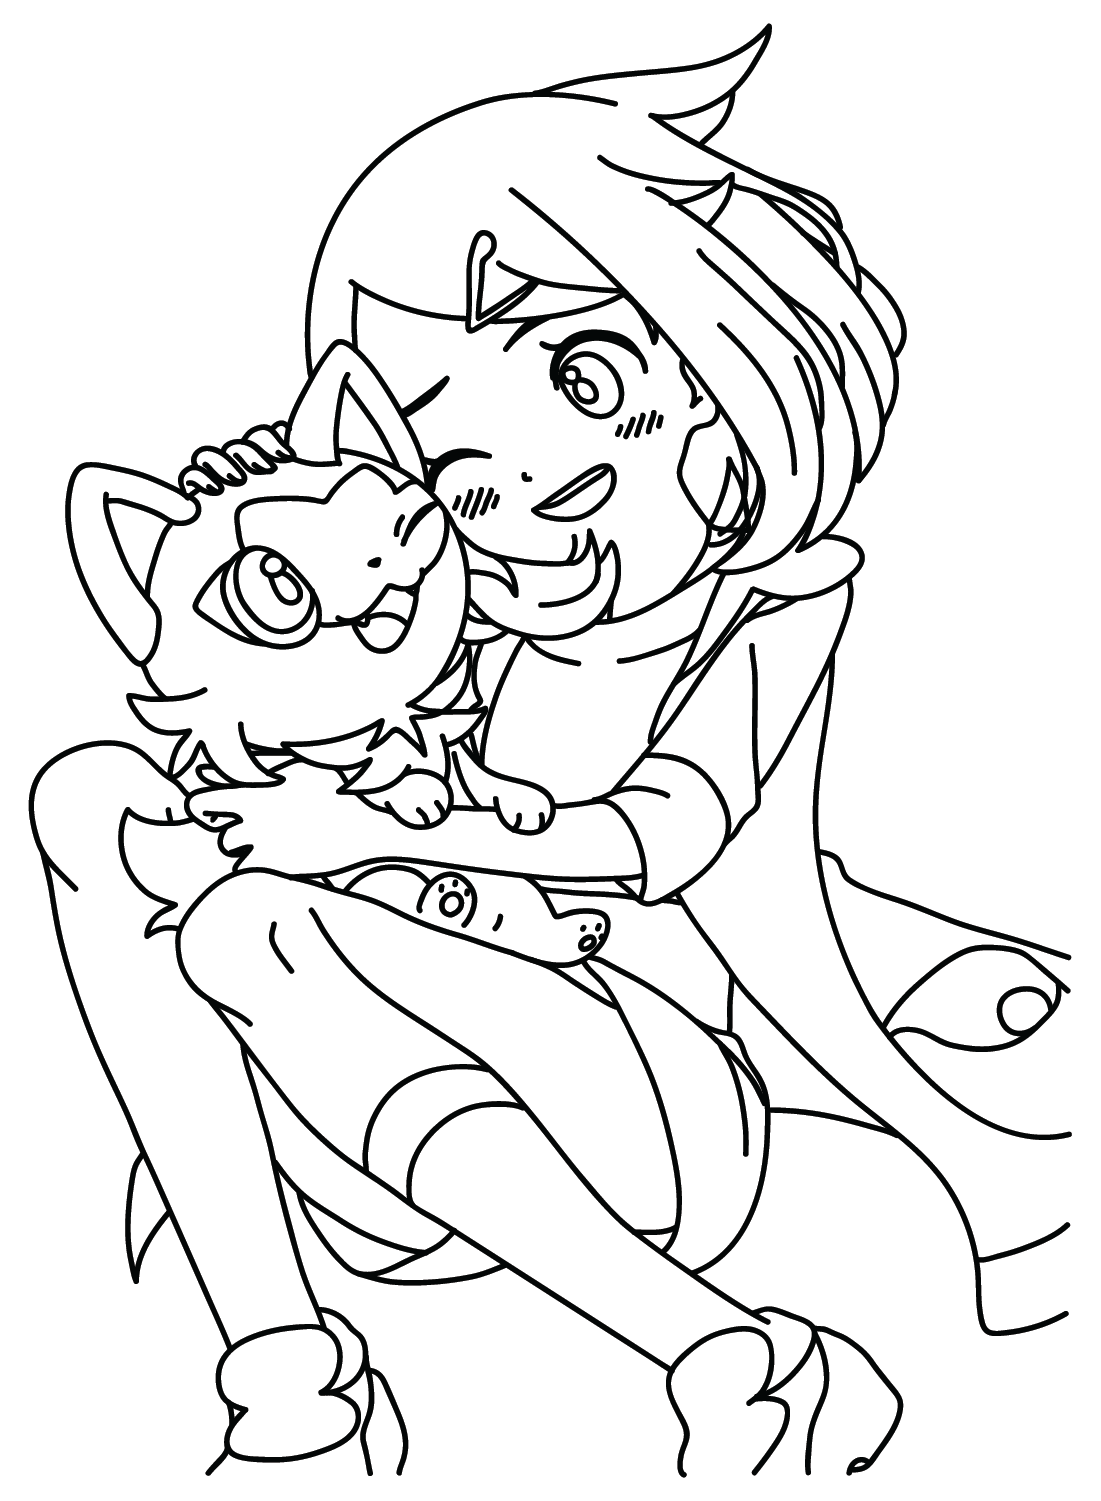 Liko Pokemon Coloring Pages to for Kids from Liko Pokemon